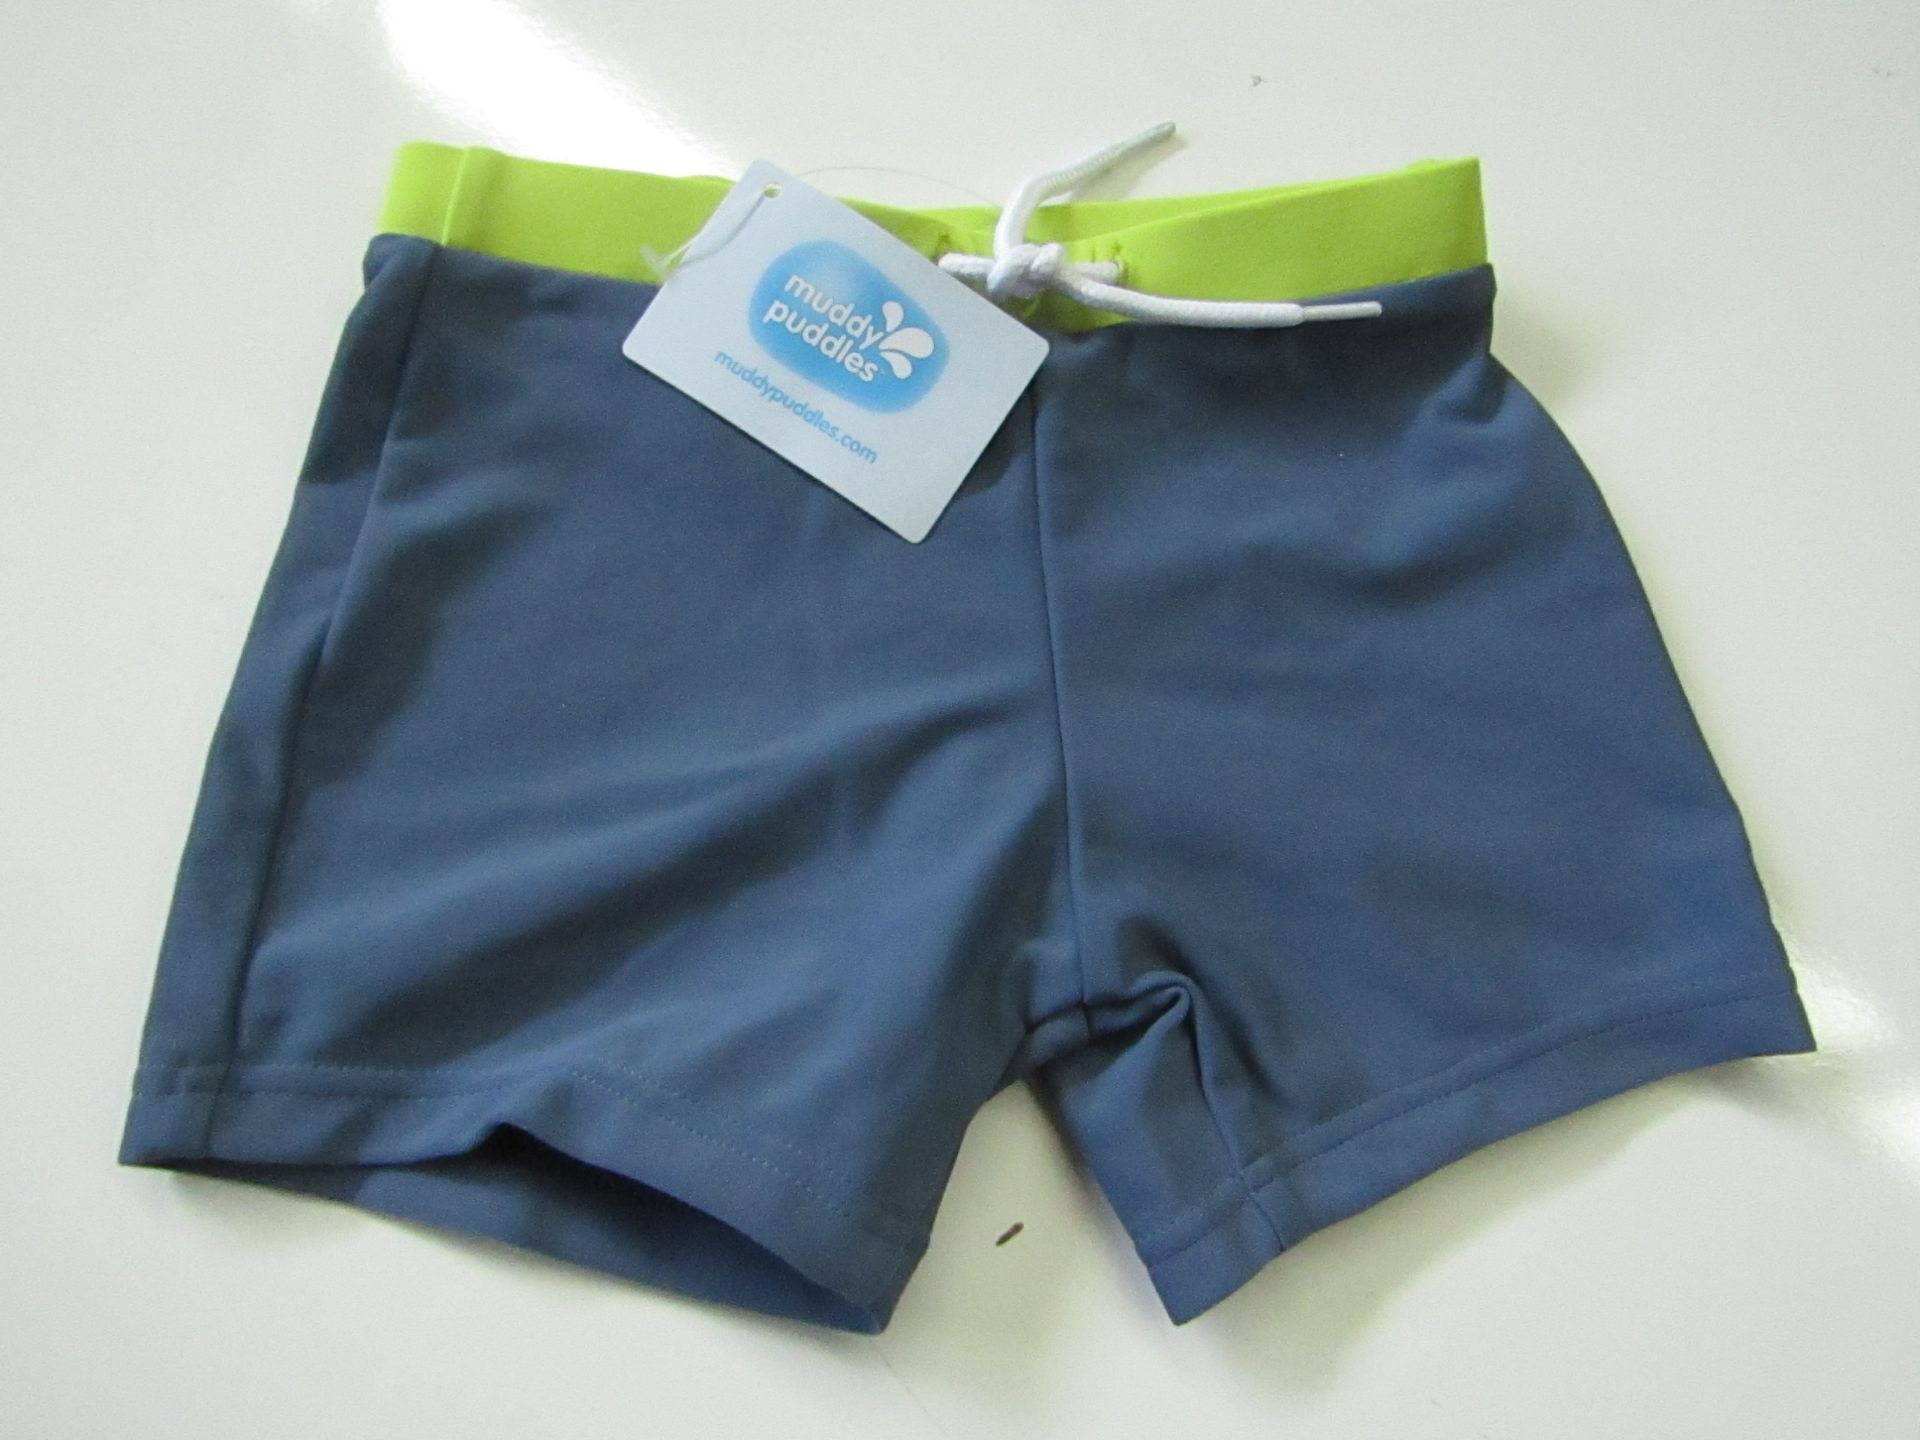 Muddy Puddles 5 X Boys Colour Block Trunks Blue/Lime Aged 2-3 yrs New & Packaged